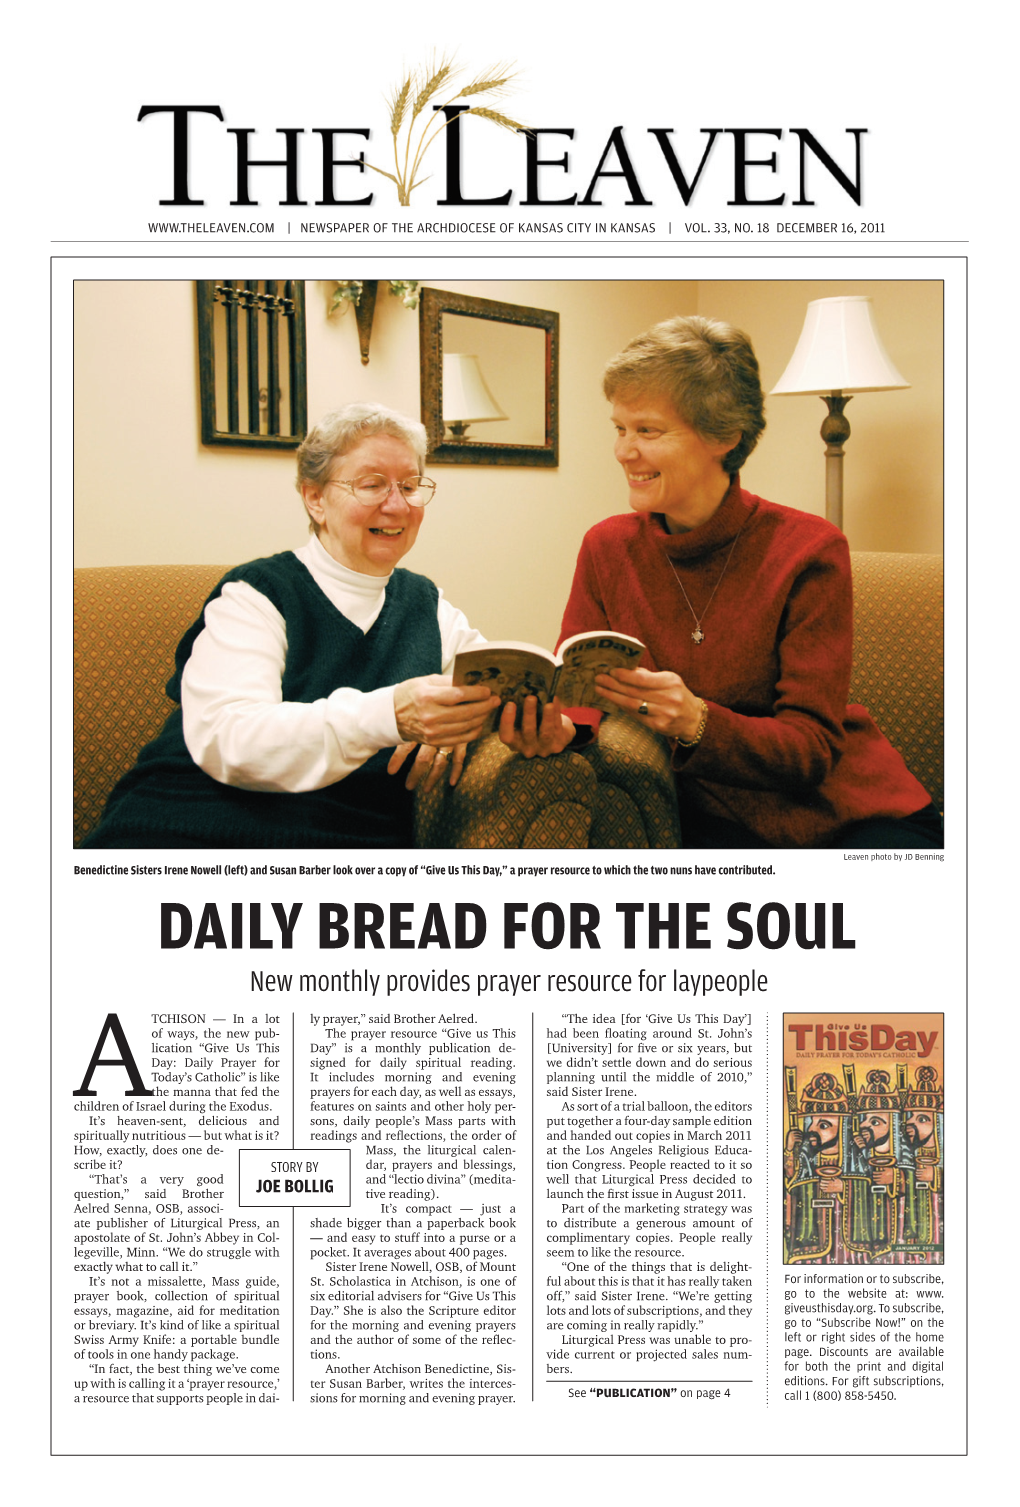 DAILY BREAD for the SOUL New Monthly Provides Prayer Resource for Laypeople